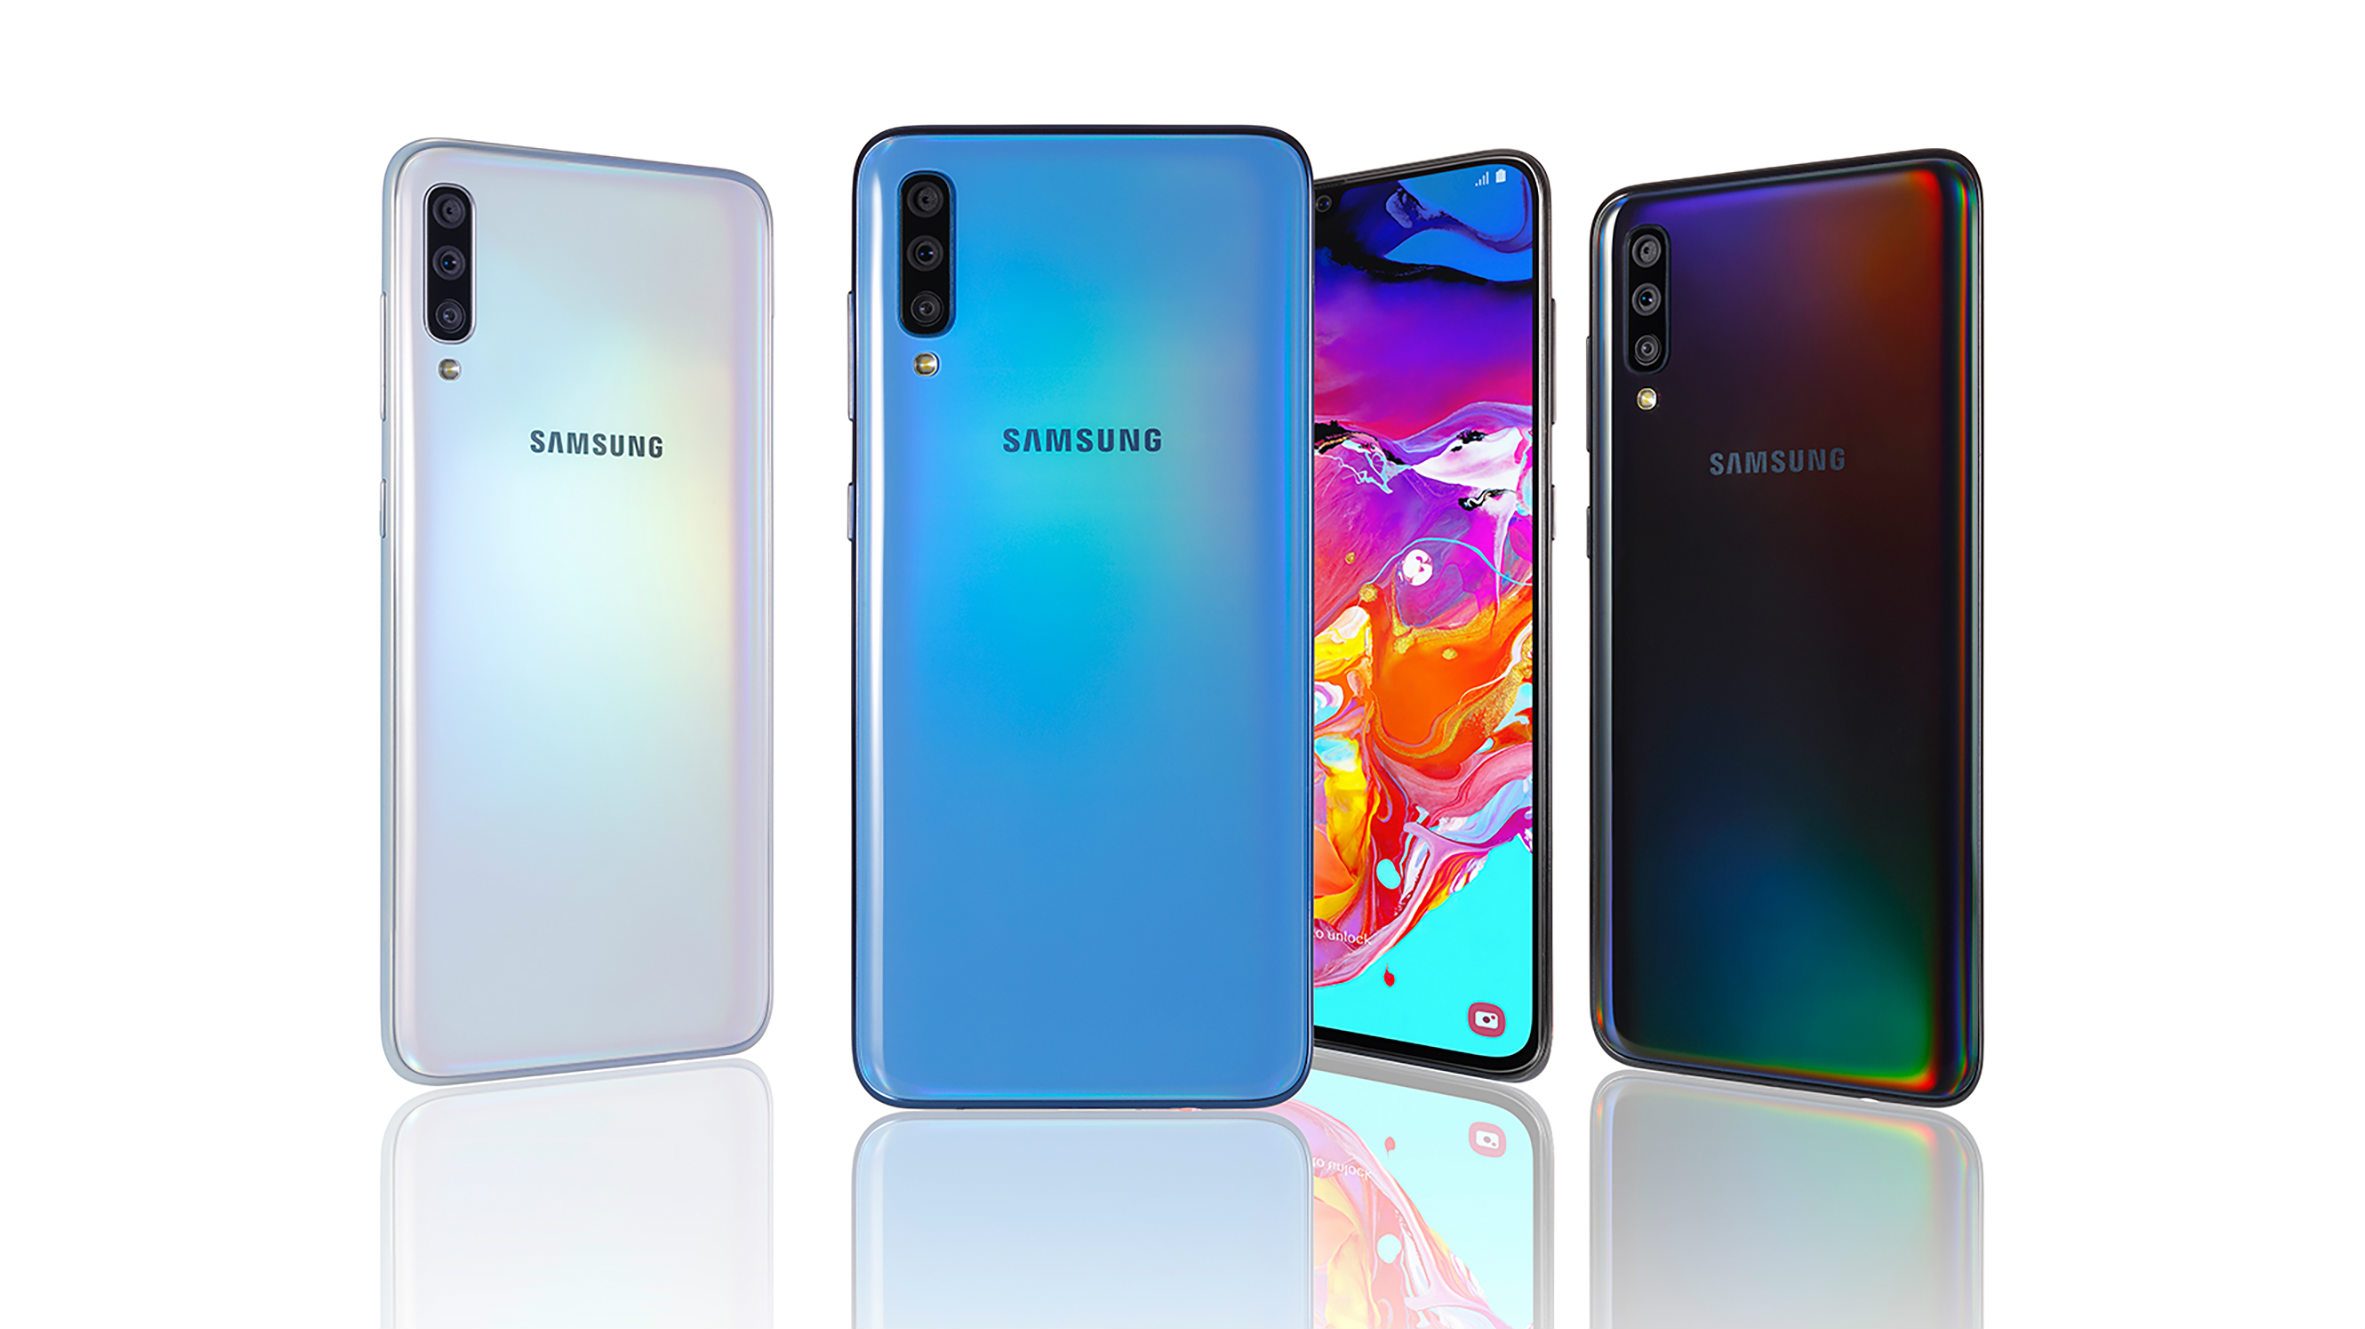 Samsung Galaxy A70: Price, specs, features in the Philippines